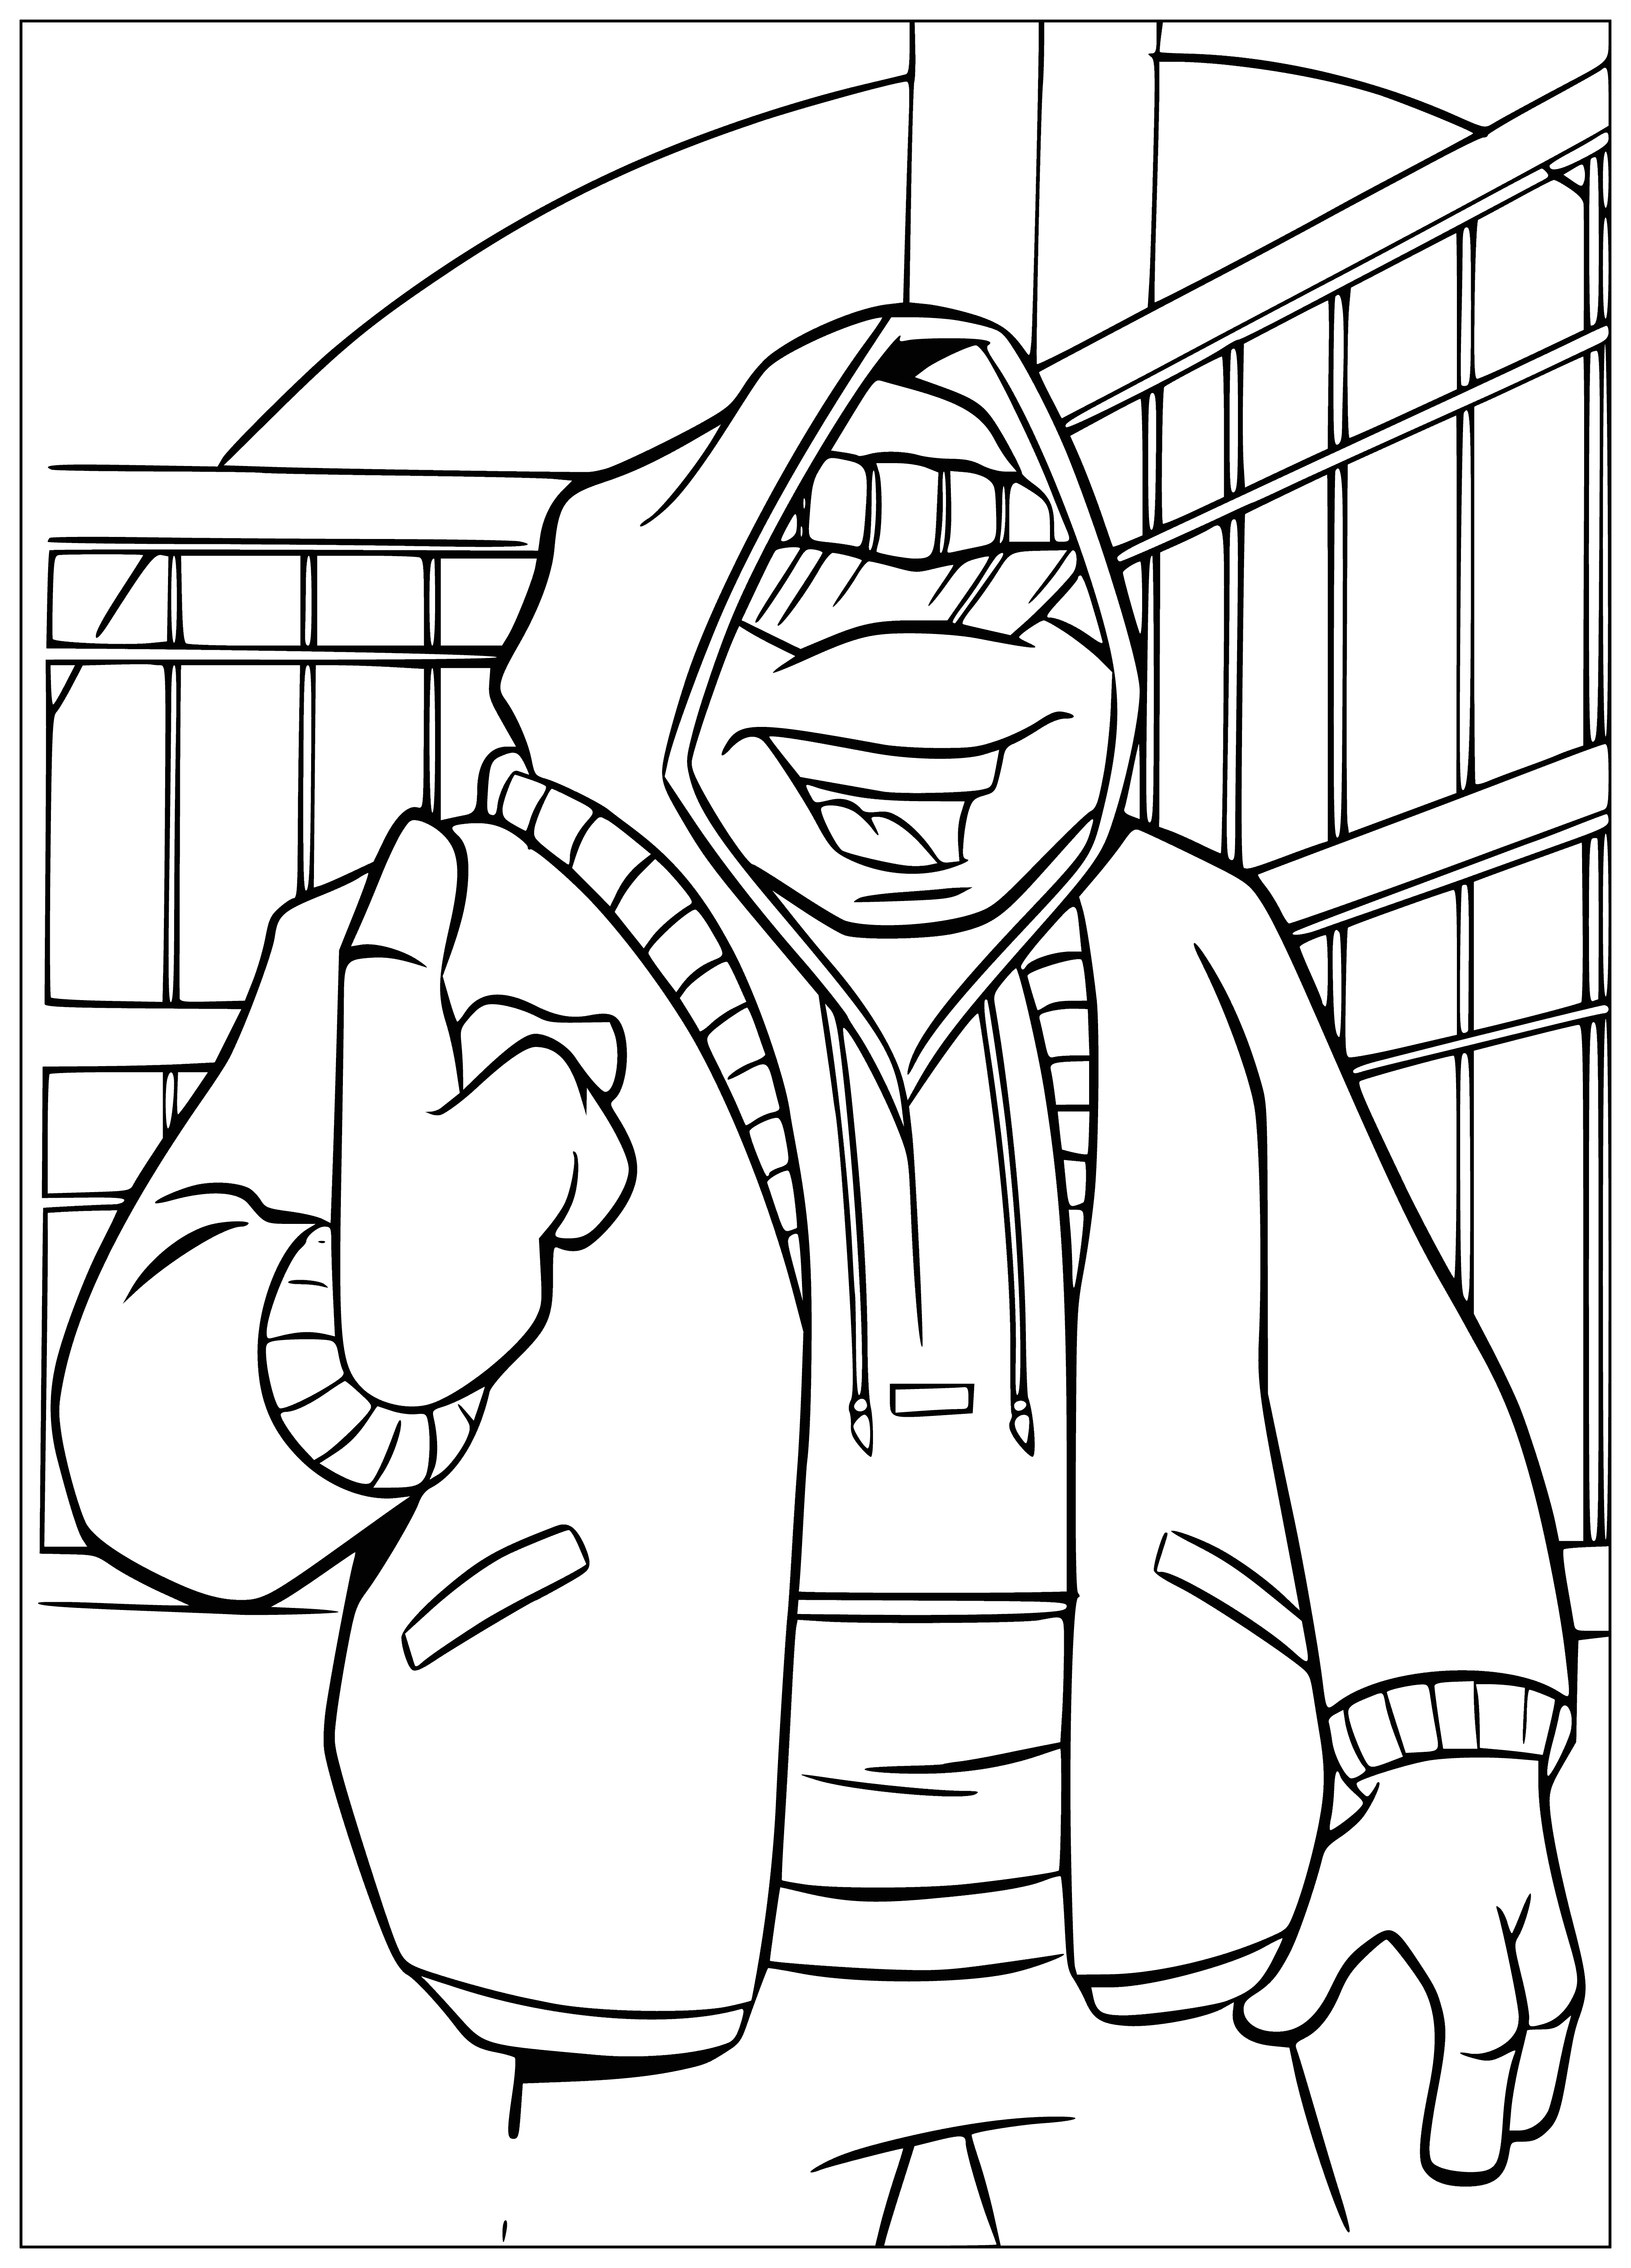 coloring page: Four turtle friends stand tall on two hind legs; they wear masks, hold weapons and differ in color (Orange, Red, Blue and Purple).